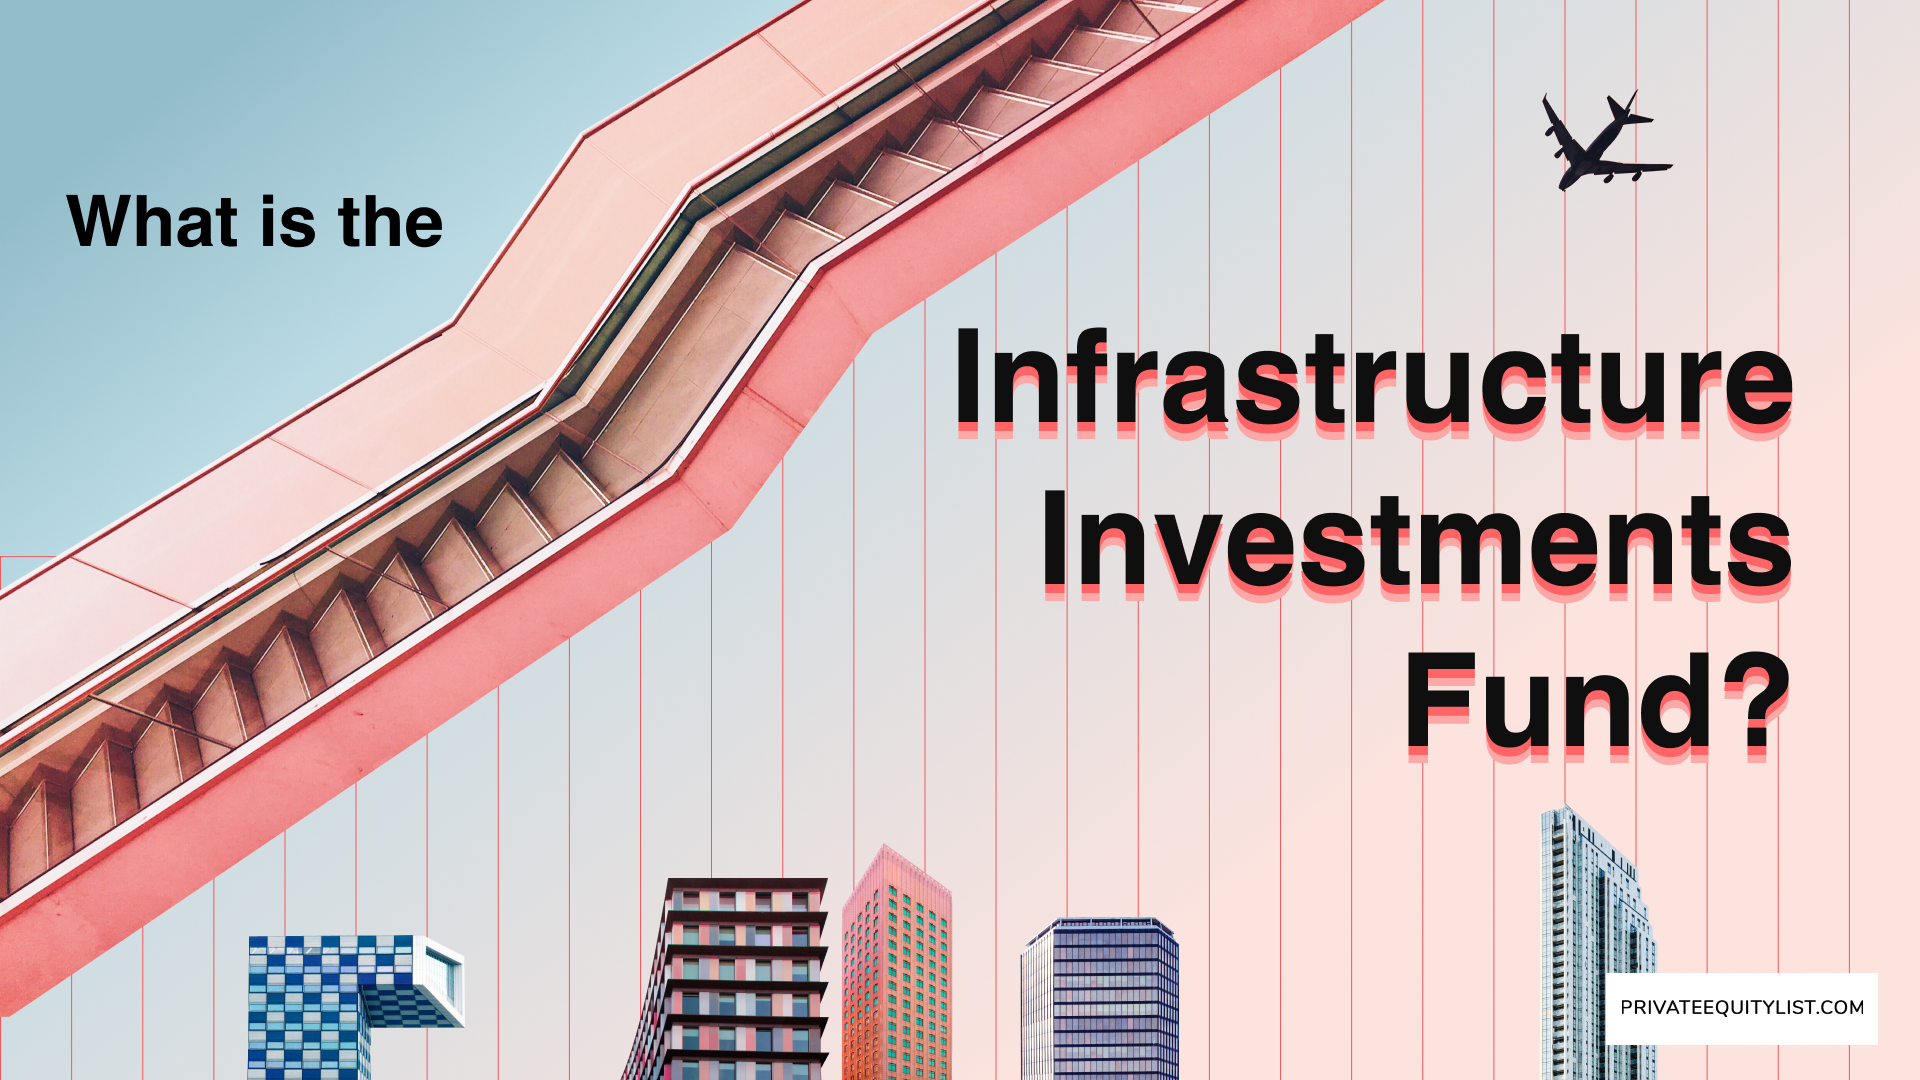 What is the Infrastructure Investments Fund?